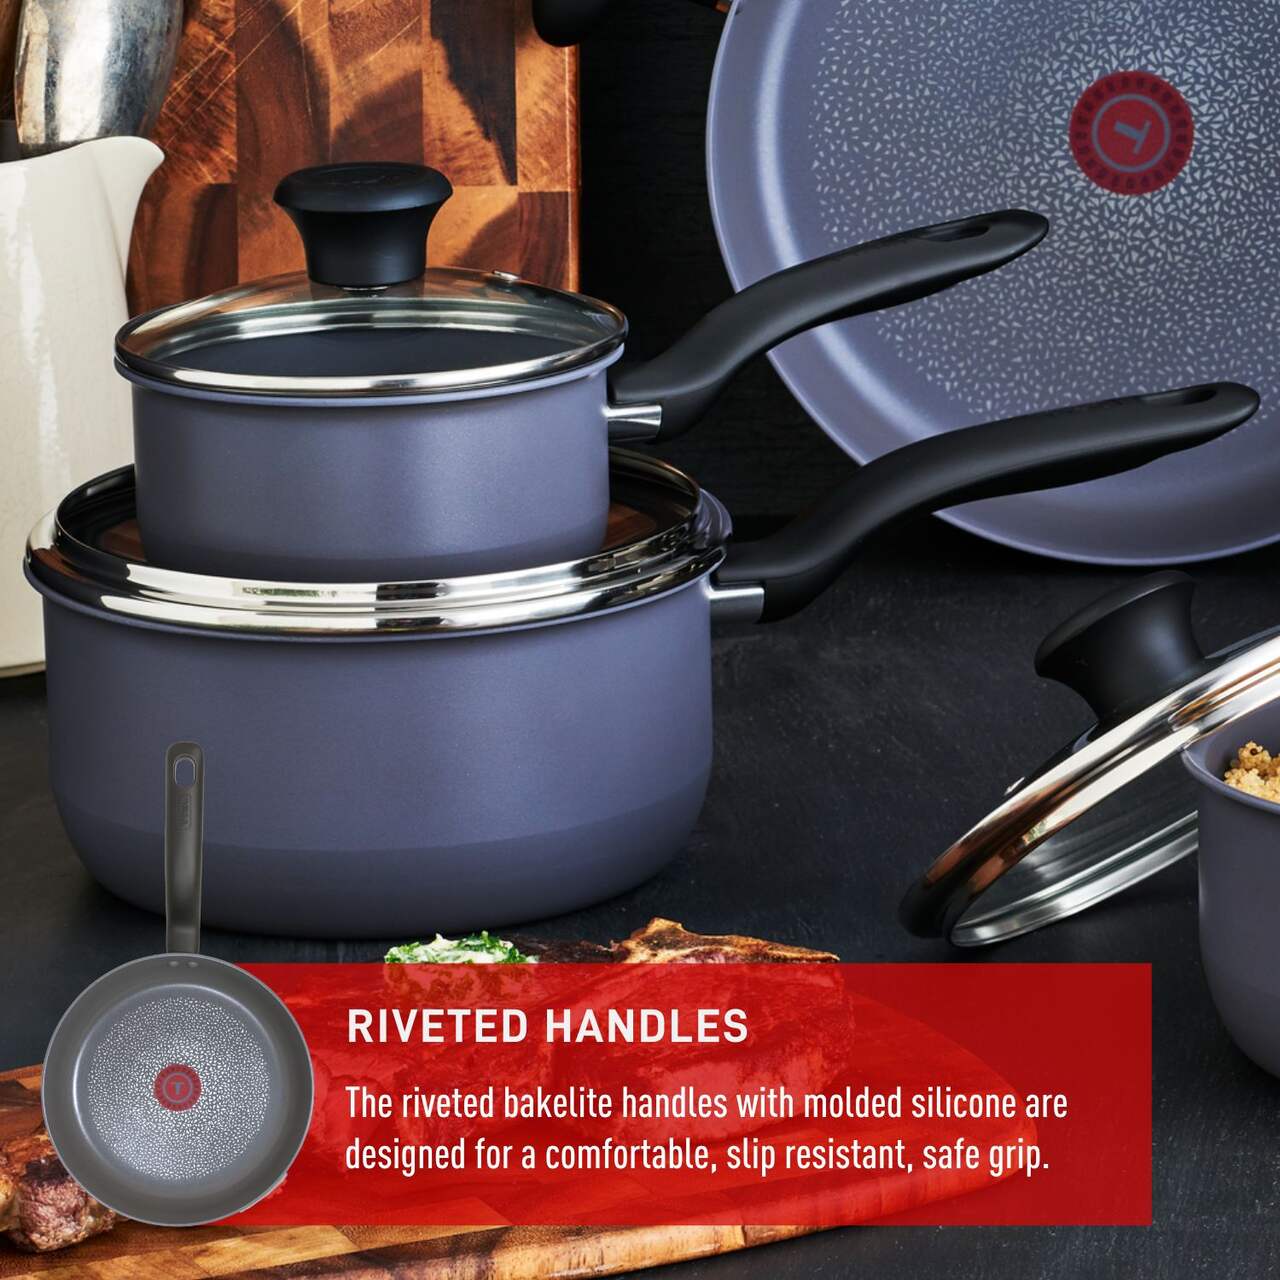 https://media-www.canadiantire.ca/product/living/kitchen/cookware/1428812/t-fal-10-piece-titanium-non-stick-cookset-d01d6208-e240-44e9-a6f0-08ed2d18e11b-jpgrendition.jpg?imdensity=1&imwidth=1244&impolicy=mZoom